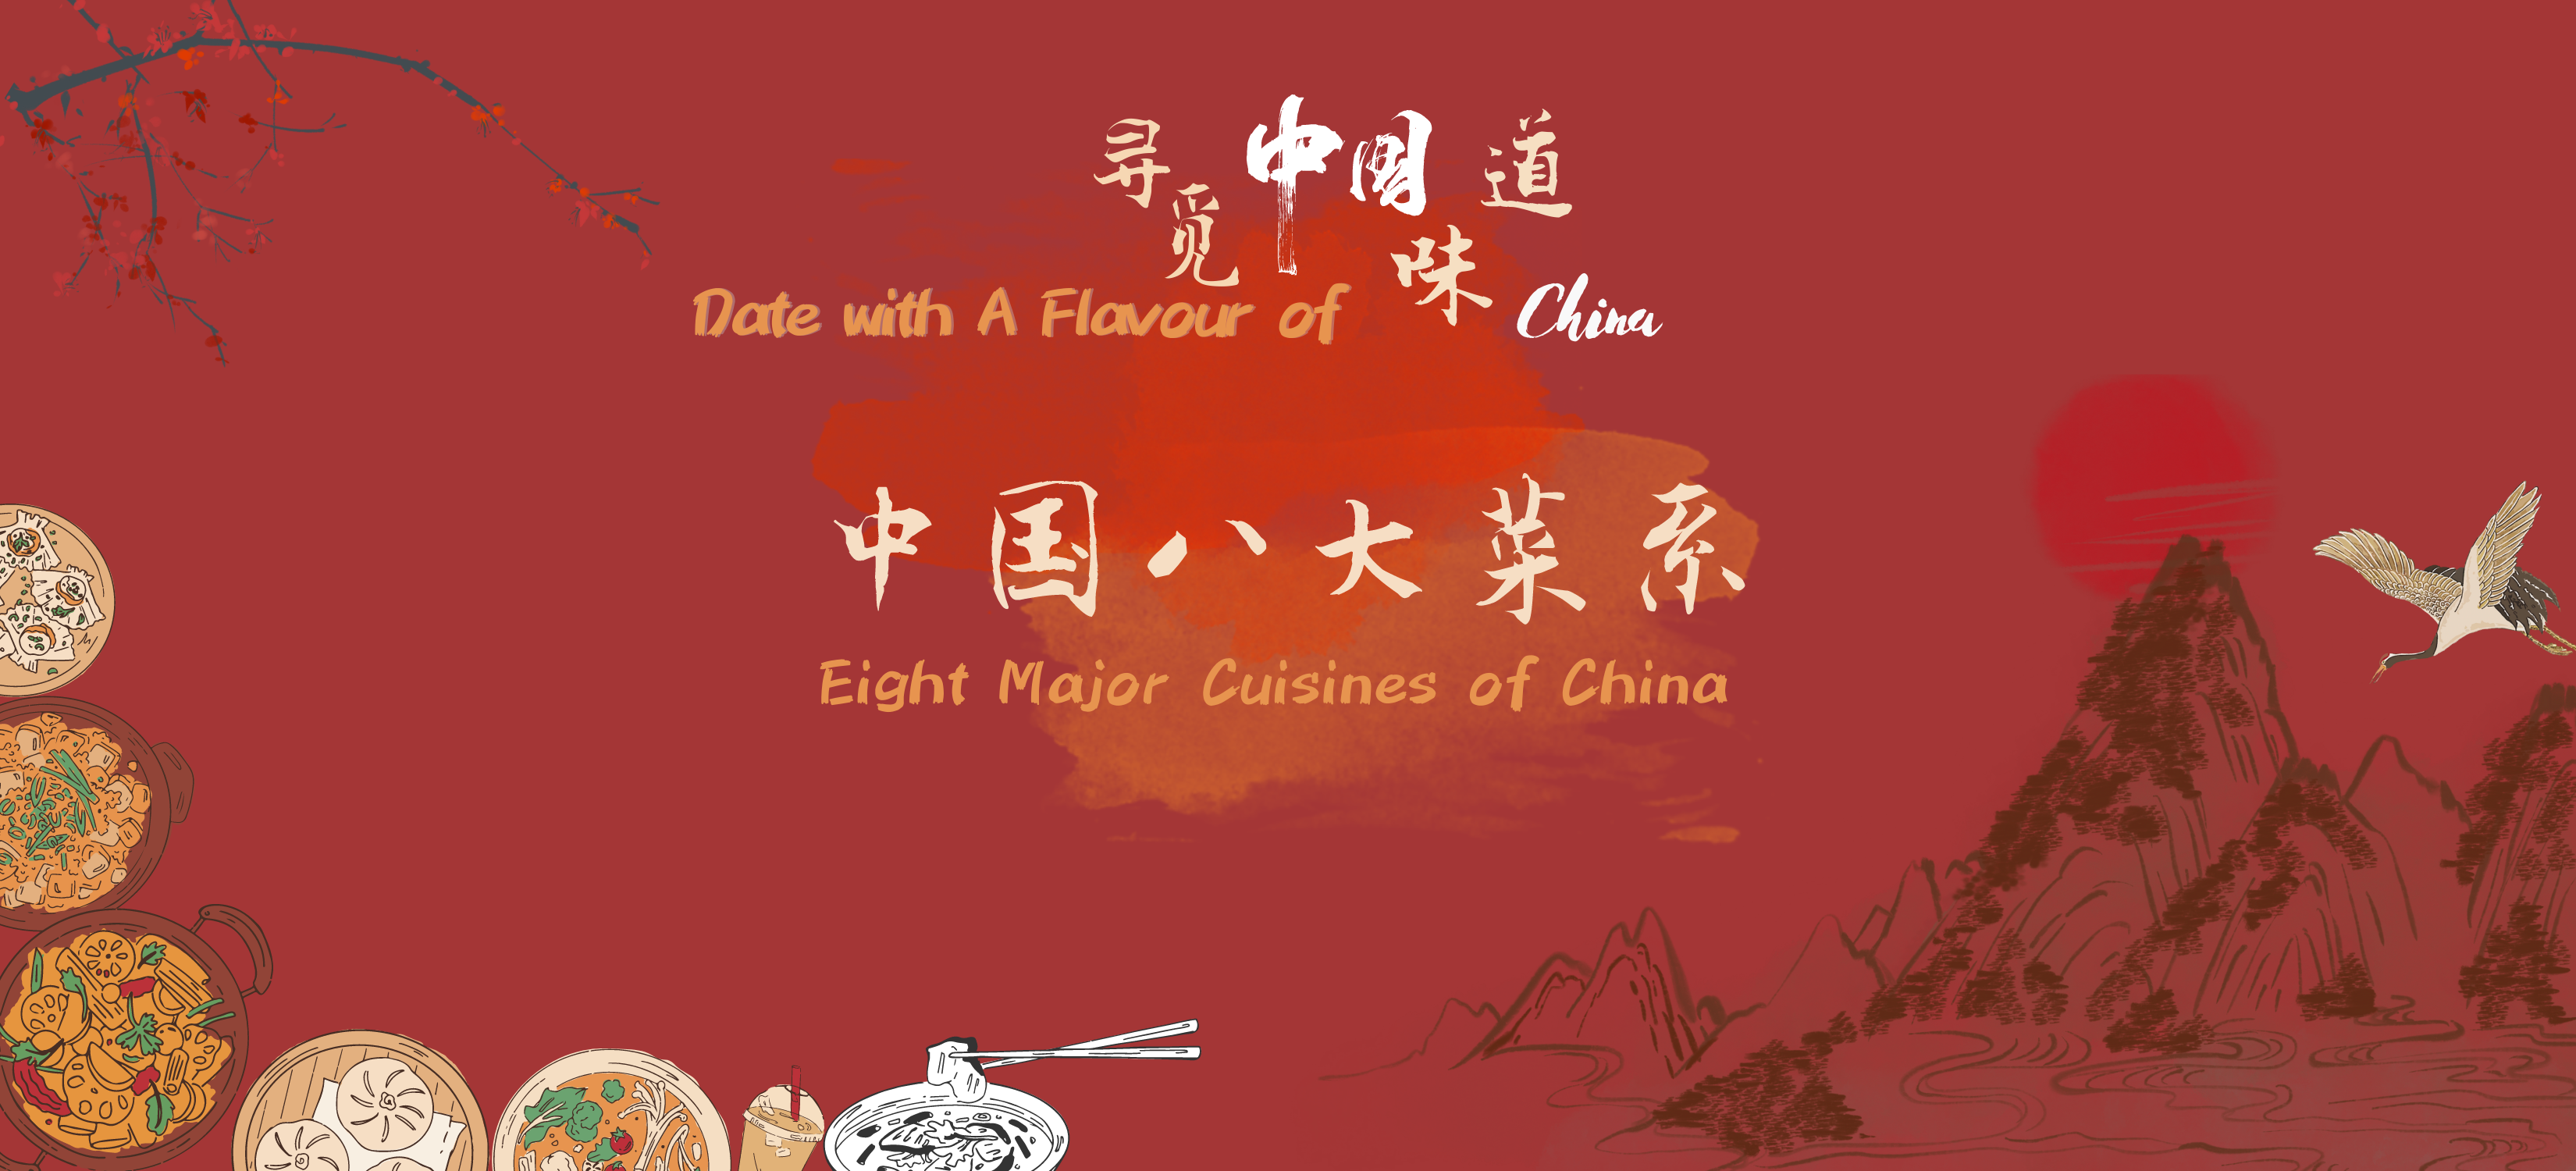 Eight Major Cuisines of China